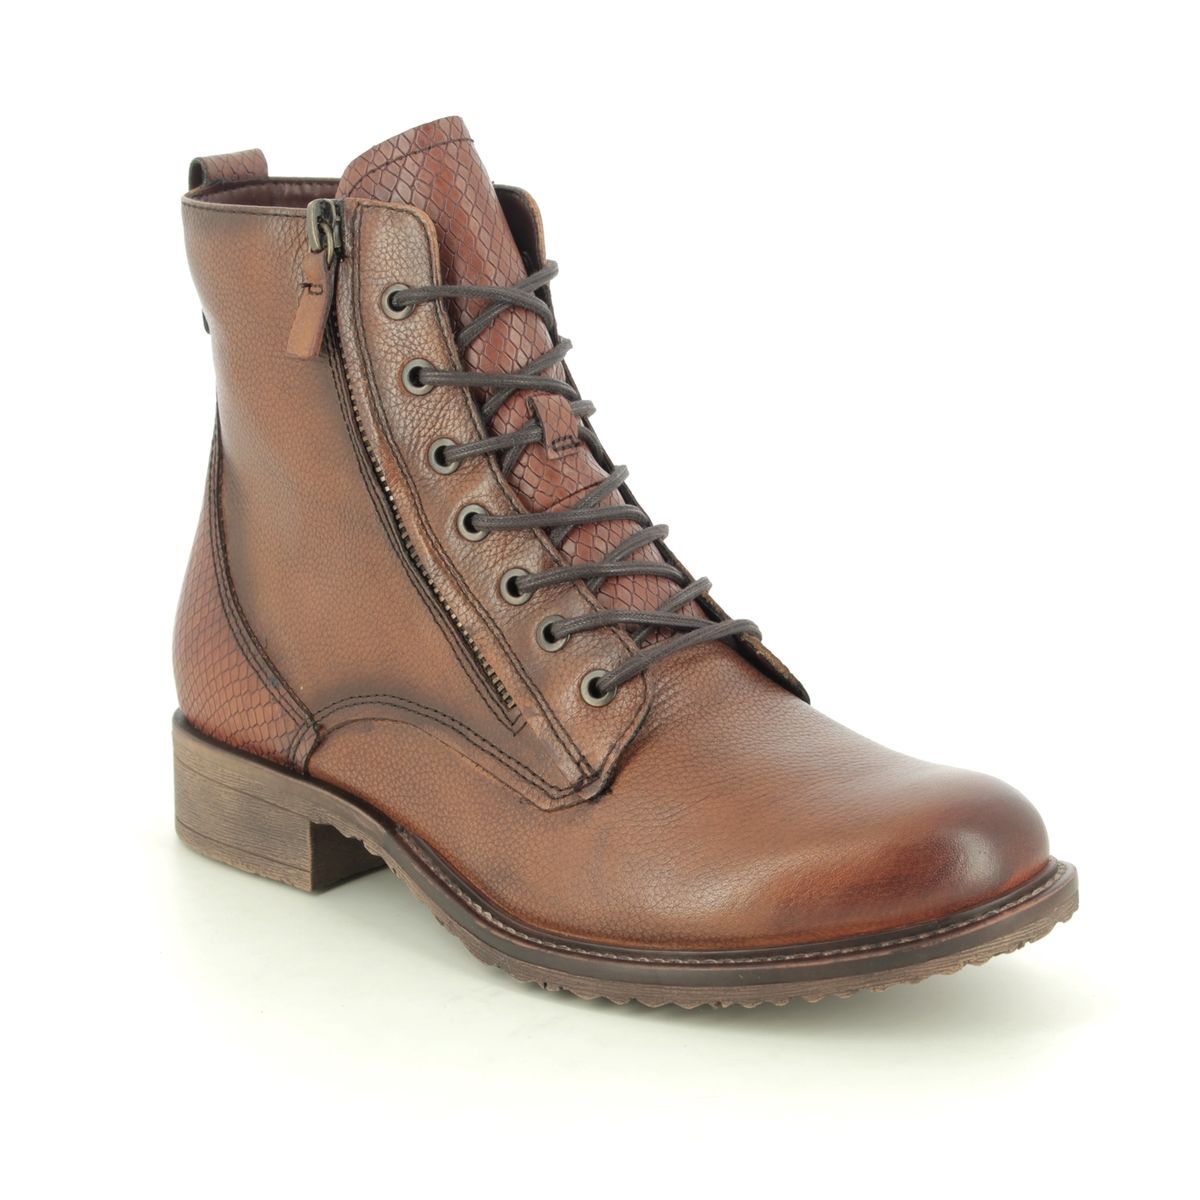 Tamaris Anouk Tan Leather  Womens Lace Up Boots 25211-25-378 In Size 40 In Plain Tan Leather